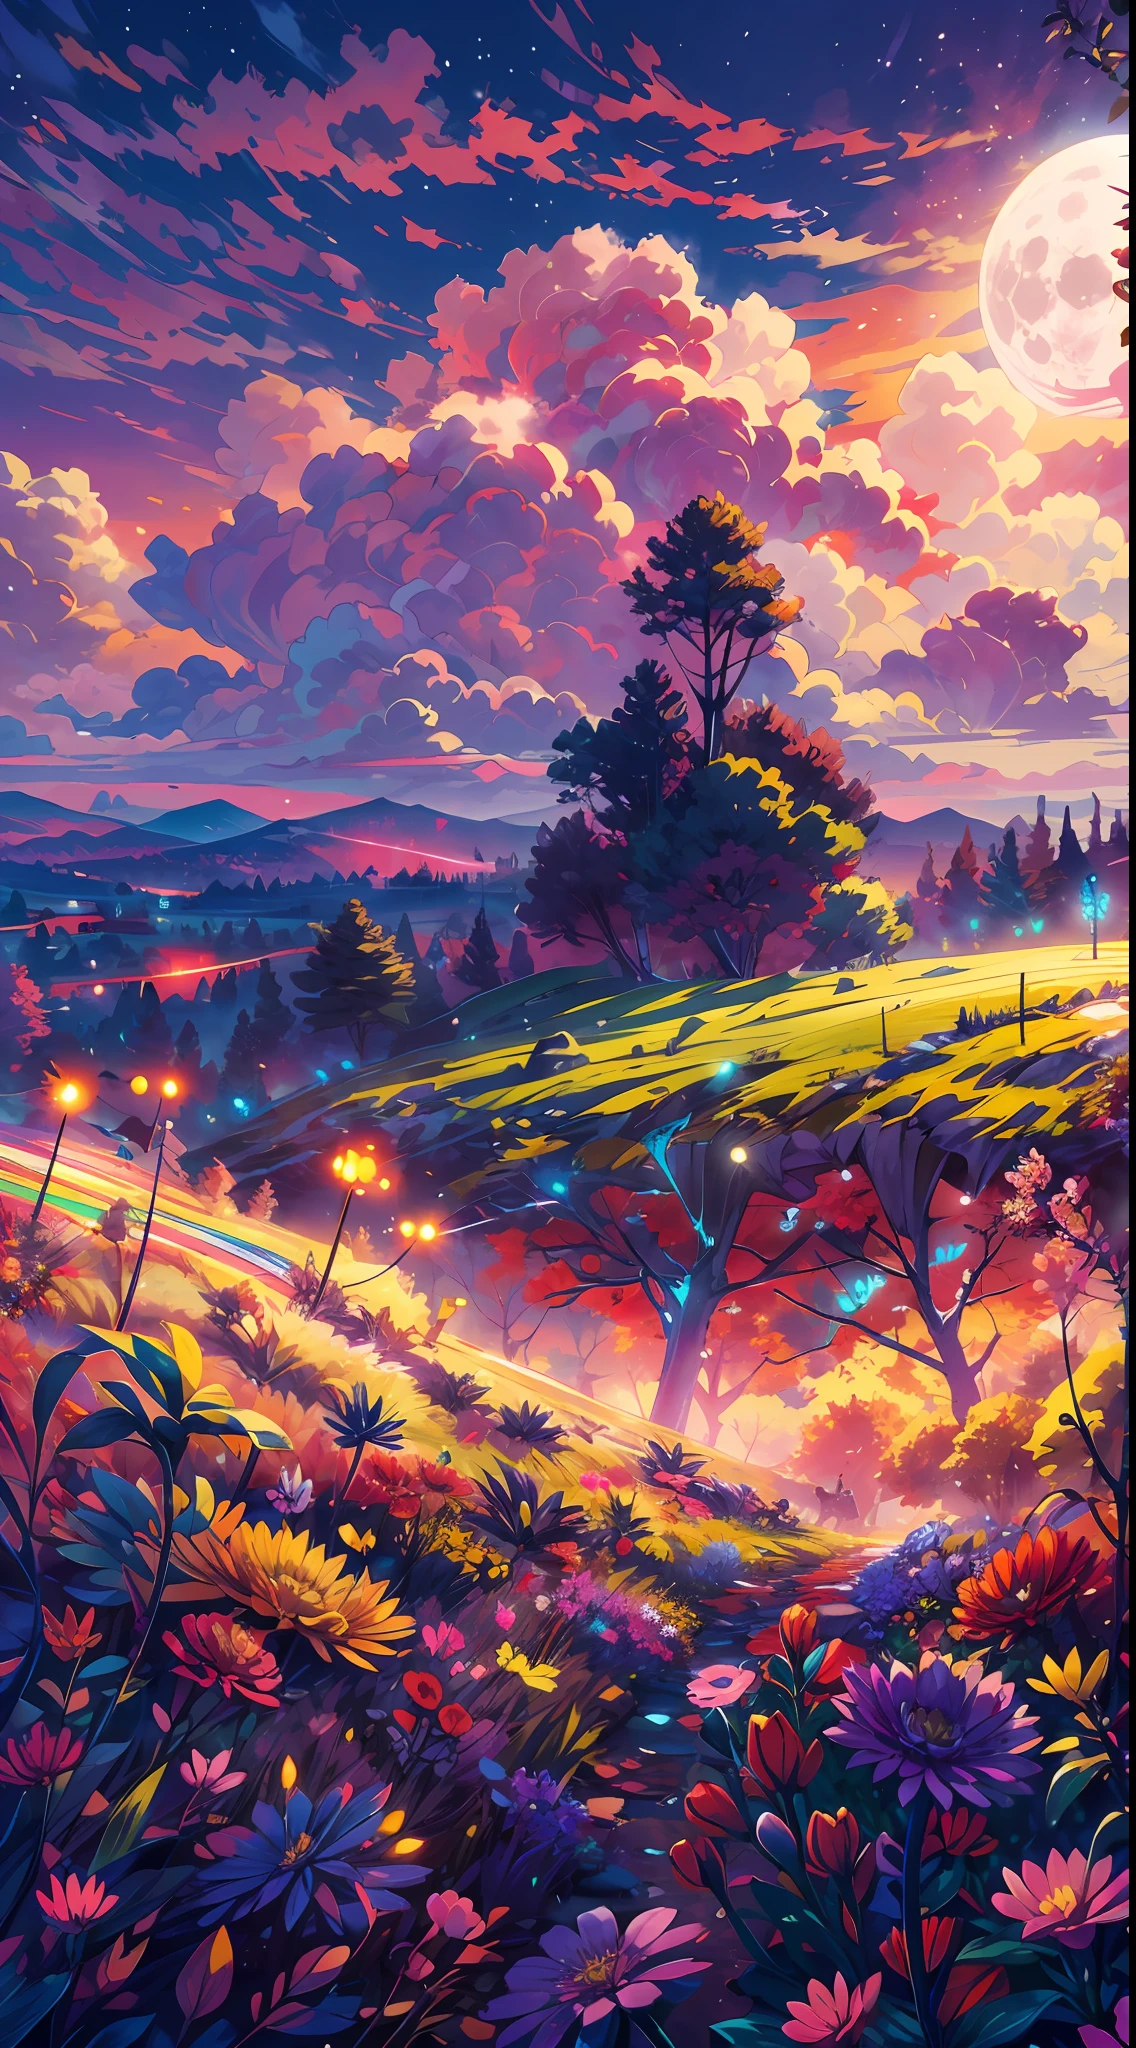 A wide landscape photo, (viewed from below, the sky is above, and the open field is below), an anime girl sitting on colorful flowers field looking up, (full moon: 1.2), (meteor: 0.9), (nebula: 1.3), distant mountains , shooting stars, Trees BREAK Crafting Art, (Warm Light: 1.2), (Firefly: 1.2), Lights, Lots of Purple and Orange, Intricate Details, colorful palette,Volumetric Lighting BREAK (Masterpiece: 1.2), (Best Quality), 4k, Ultra Detailed, (Dynamic Composition: 1.4), Rich in Detail and Color, (Rainbow Color: 1.2), (Glow, Atmospheric Lighting), Dreamy, Magical, (Solo: 1.2)